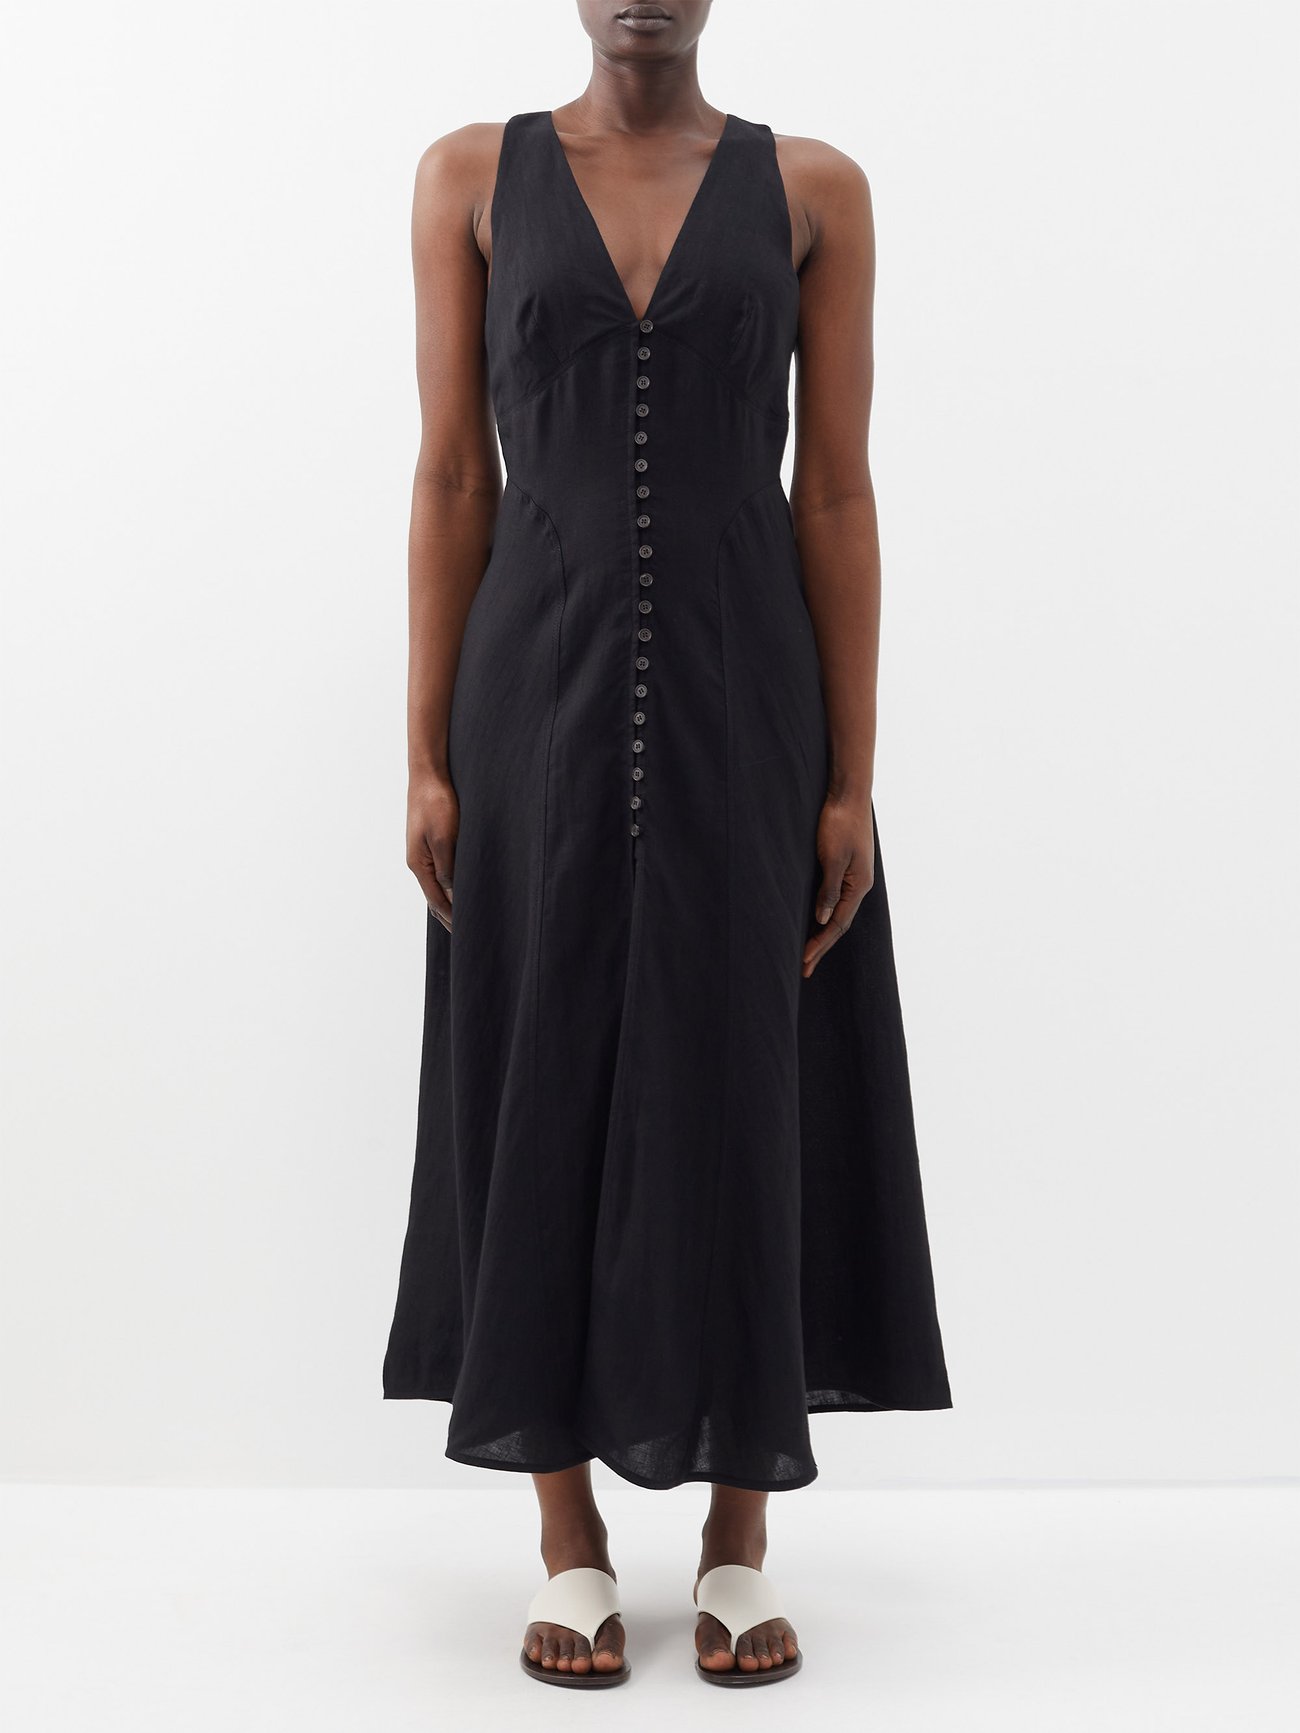 Black summer dresses are the versatile and easy way to get dressed on hot summer days! Pared-back elegance is Three Graces London's calling card, as evidenced in the clean and understated lines of this black linen Rose dress.